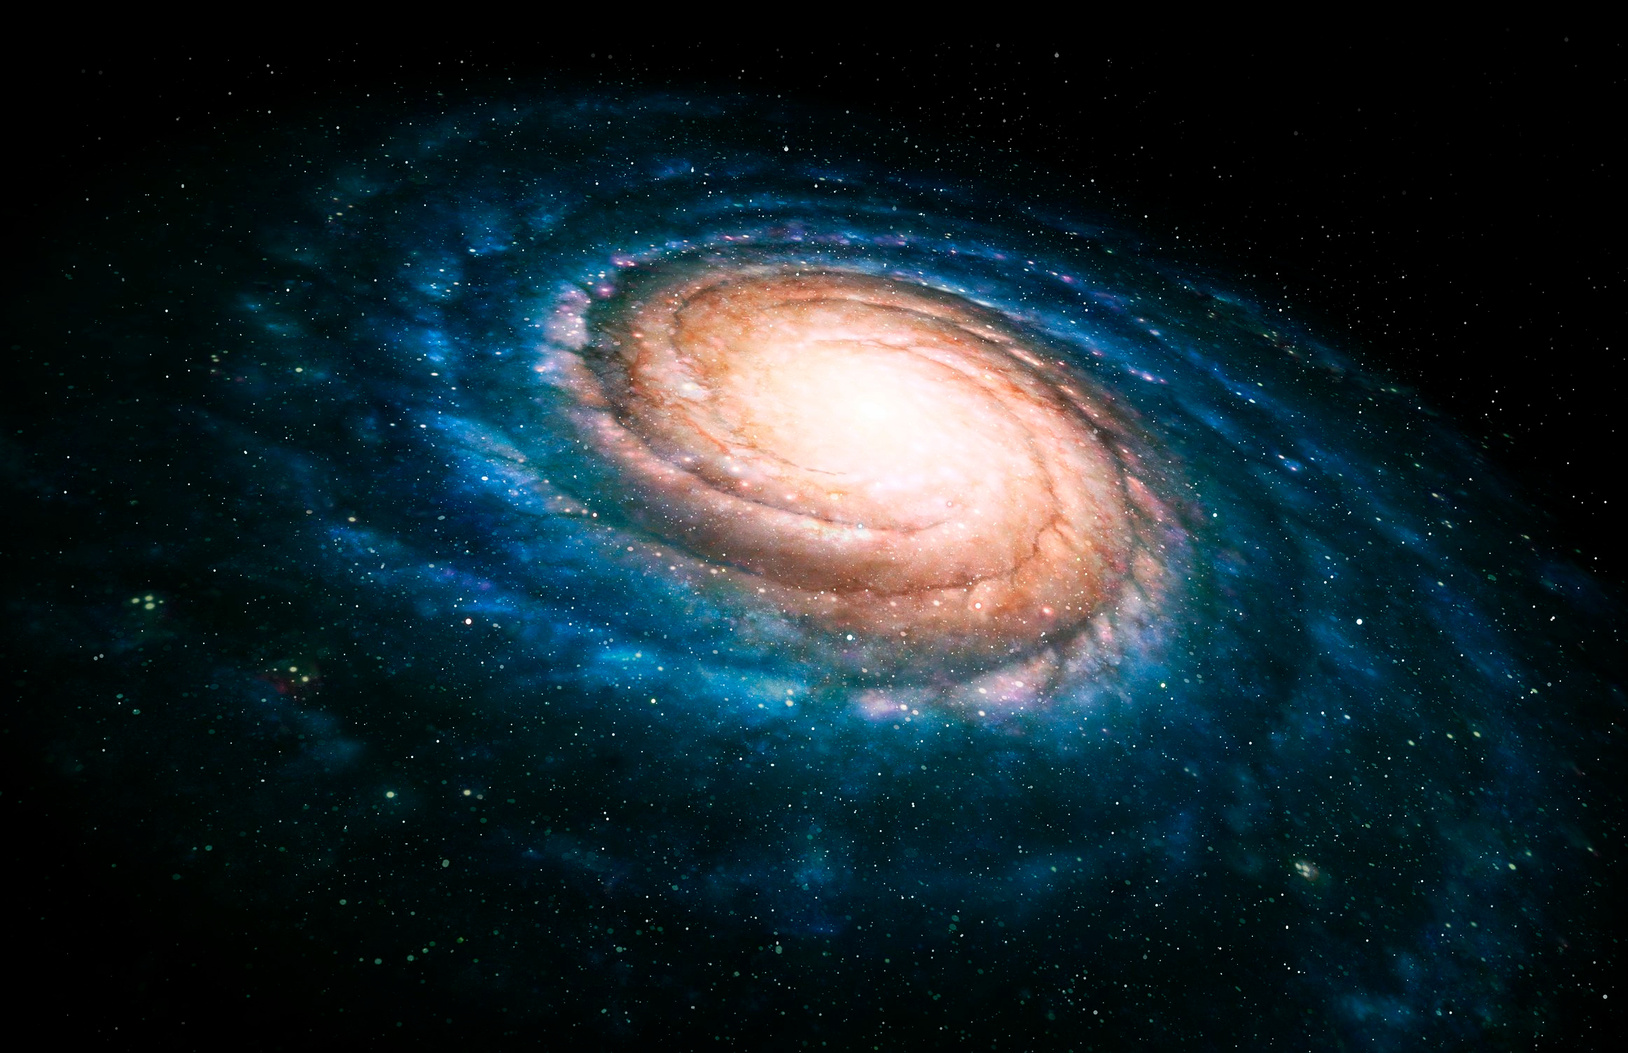 "Spiral galaxy. Artwork of a spiral galaxy seen at an oblique angle. The spiral arms (blue) contain hot